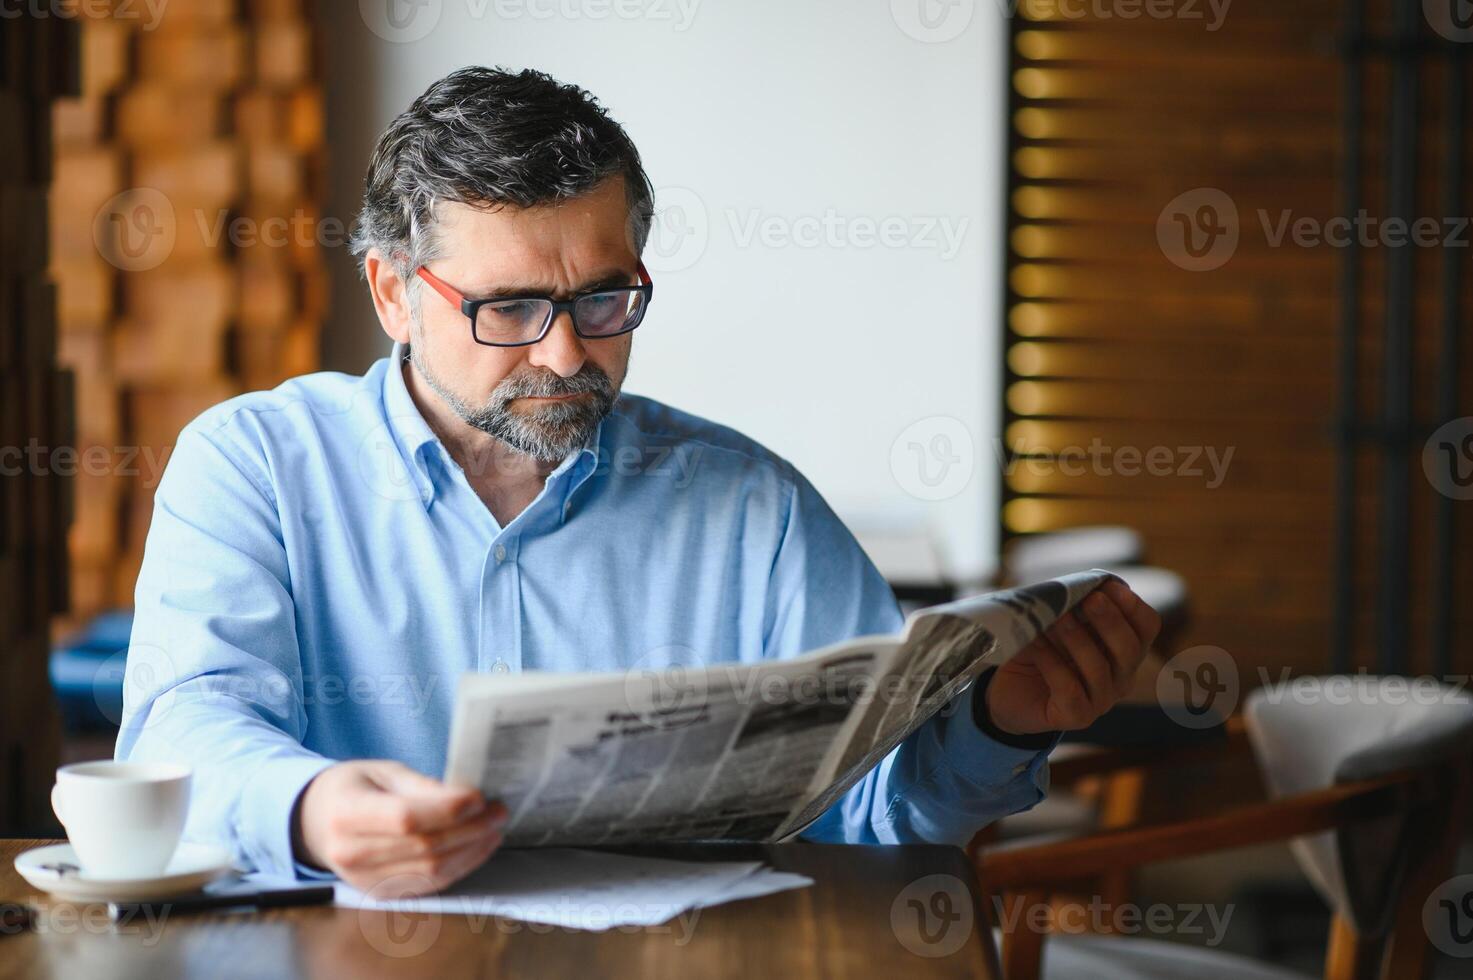 coffee break. man drinking coffee and reading newspaper in cafe bar photo